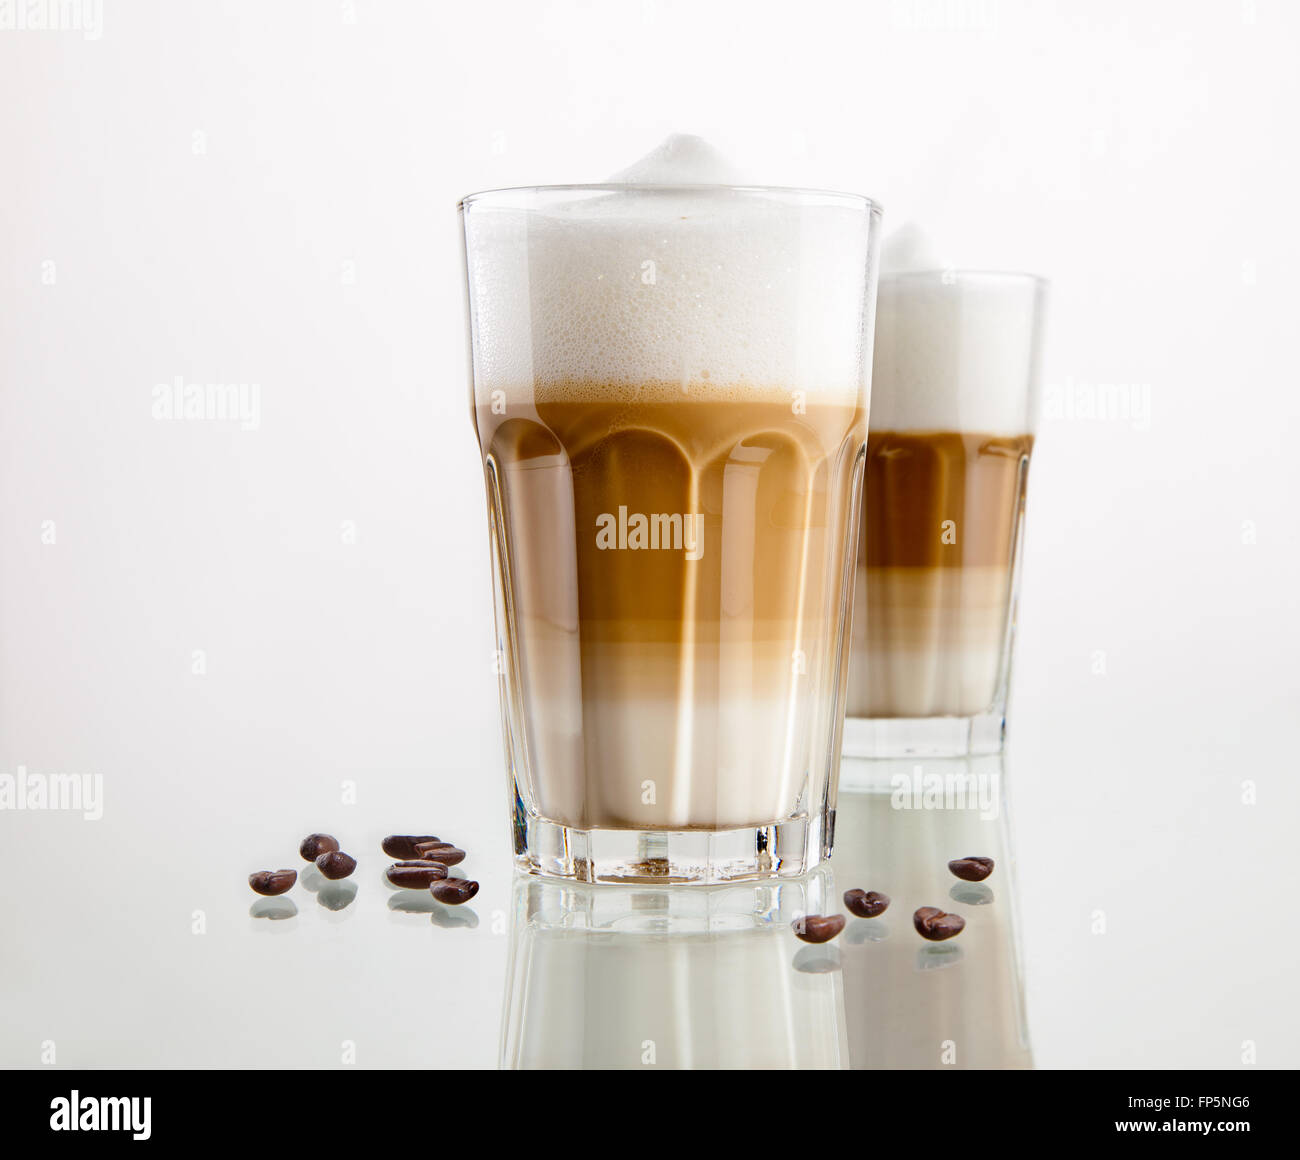 https://c8.alamy.com/comp/FP5NG6/latte-macchiato-coffee-in-a-glass-isolated-on-white-background-FP5NG6.jpg